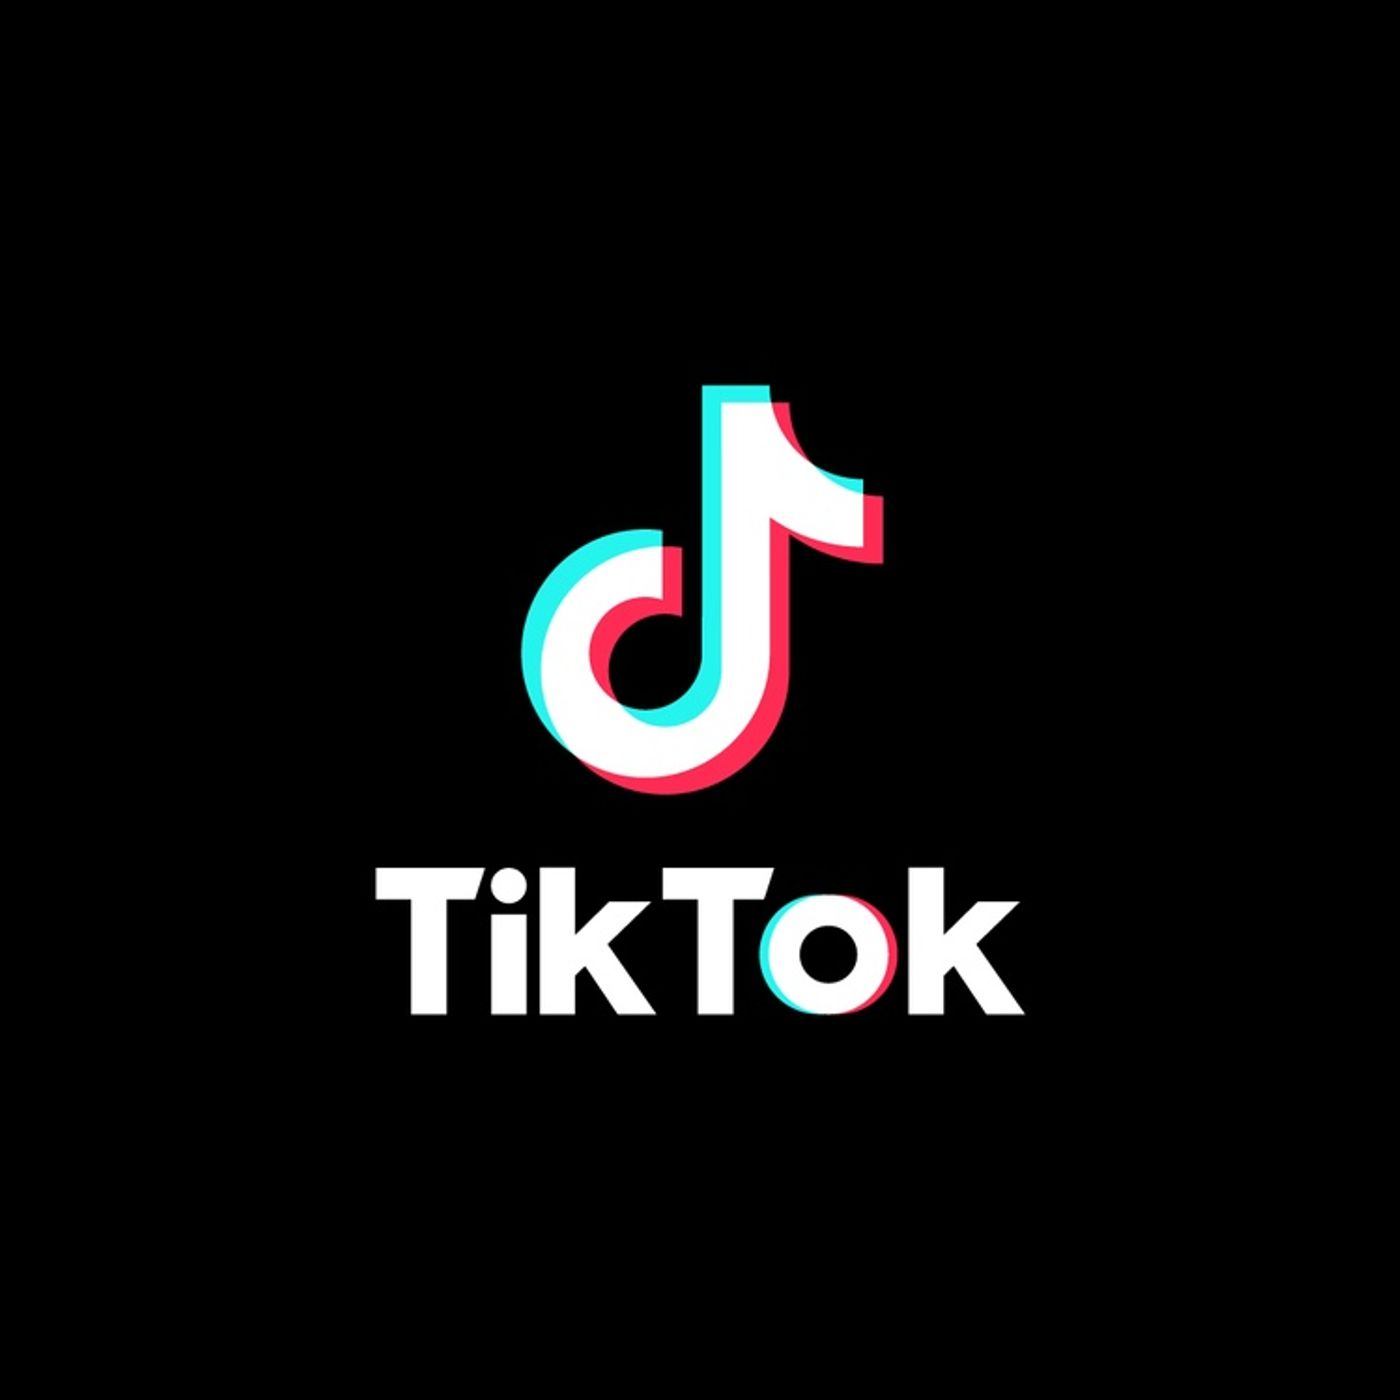 Post a Tik Tok Video, Get Kicked out of College